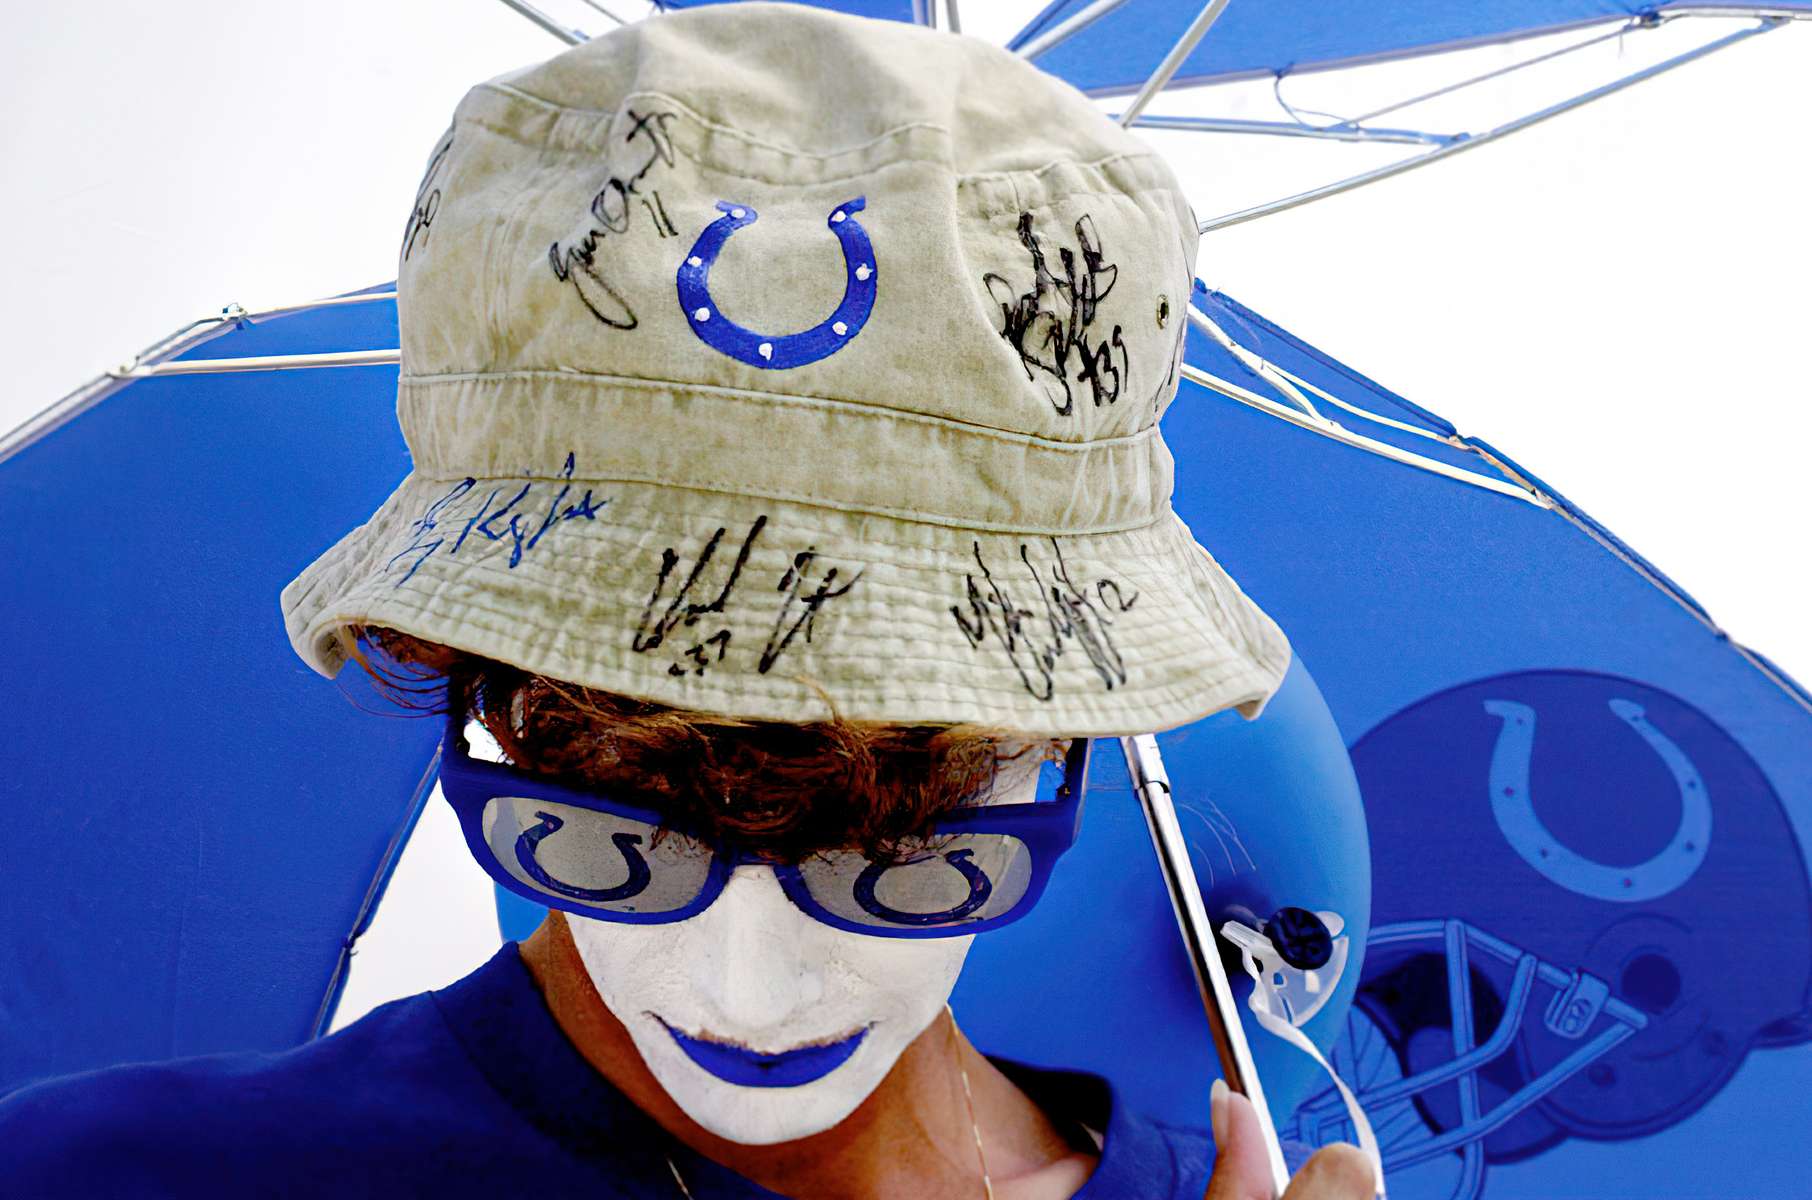 #50692. staff photo/Karen Ducey -- Dawn Timko from West Terre Haute dressed up for {quote}Do the Blue day{quote} at the Colts Training Camp.  Dawn has only missed 2 Colts practices since Training Camp began.  She is an avid fan and collects autographs from the players upon her hat after the practices end.  So far she has about 12 autographs on this hat, plus others on different items.  Dawn also won 4 tickets to the preseason game, August 24th, against the Vikings for her {quote}Do the Blue{quote} outfit. {quote}I do believe they're going to have a wonderful season.{quote} she said.